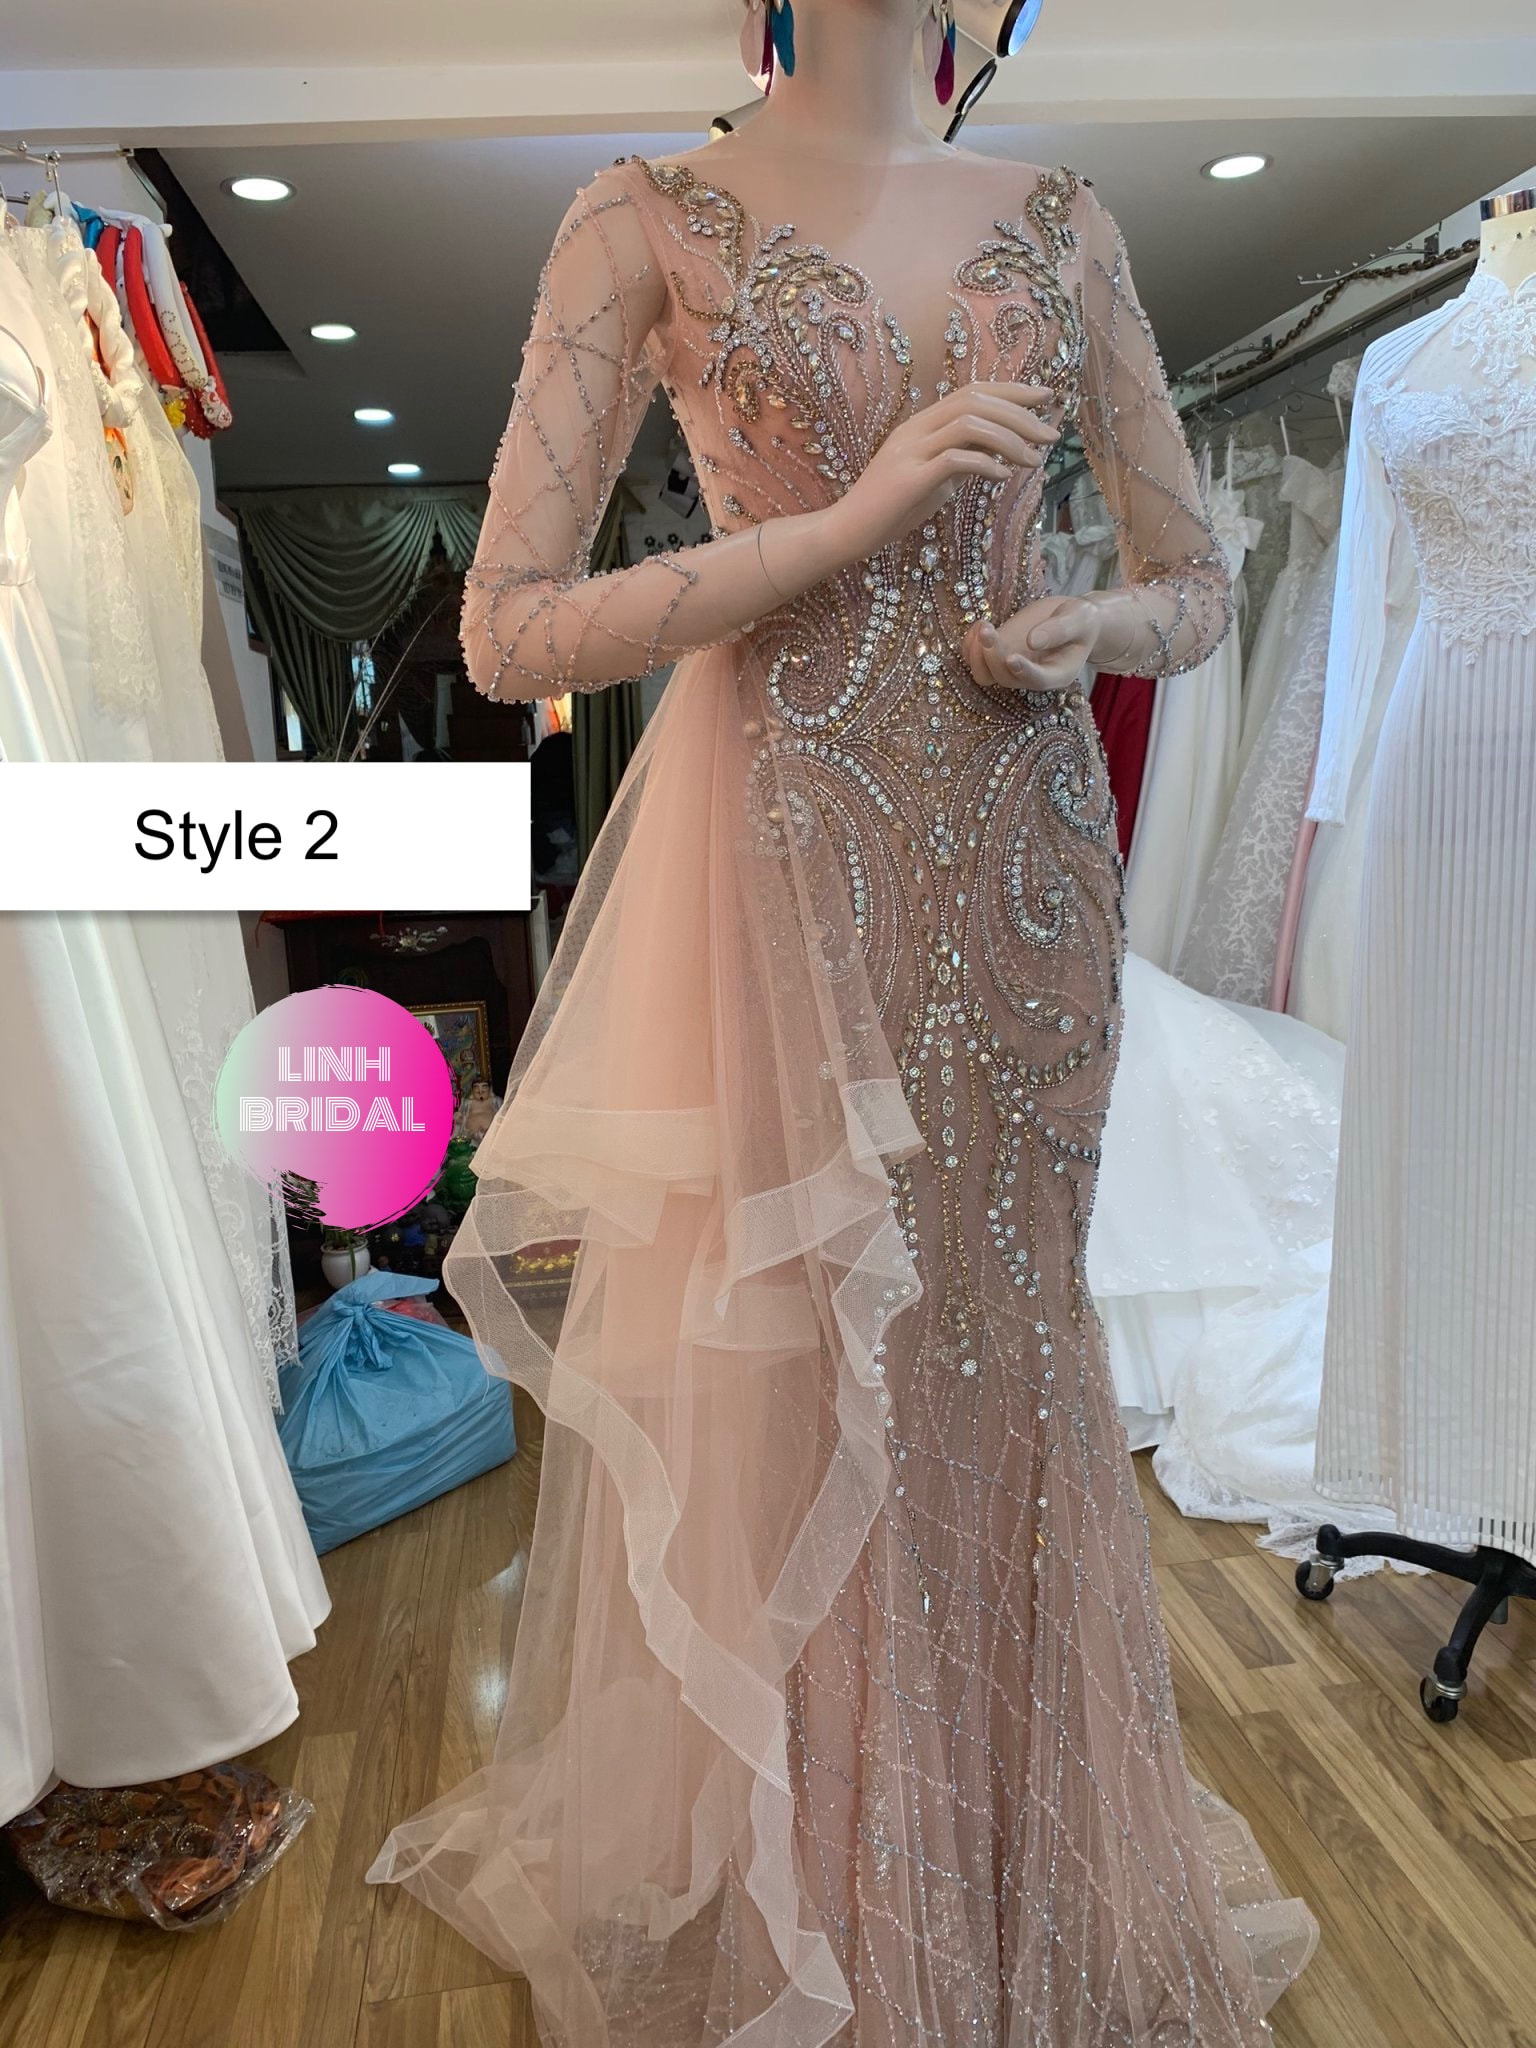 2020 New Design Ball Gown Skirt Wedding Dress Classic Wedding Gown Real  Image Factory Made Wholesale Price Bridal Dress - Wedding Dresses -  AliExpress